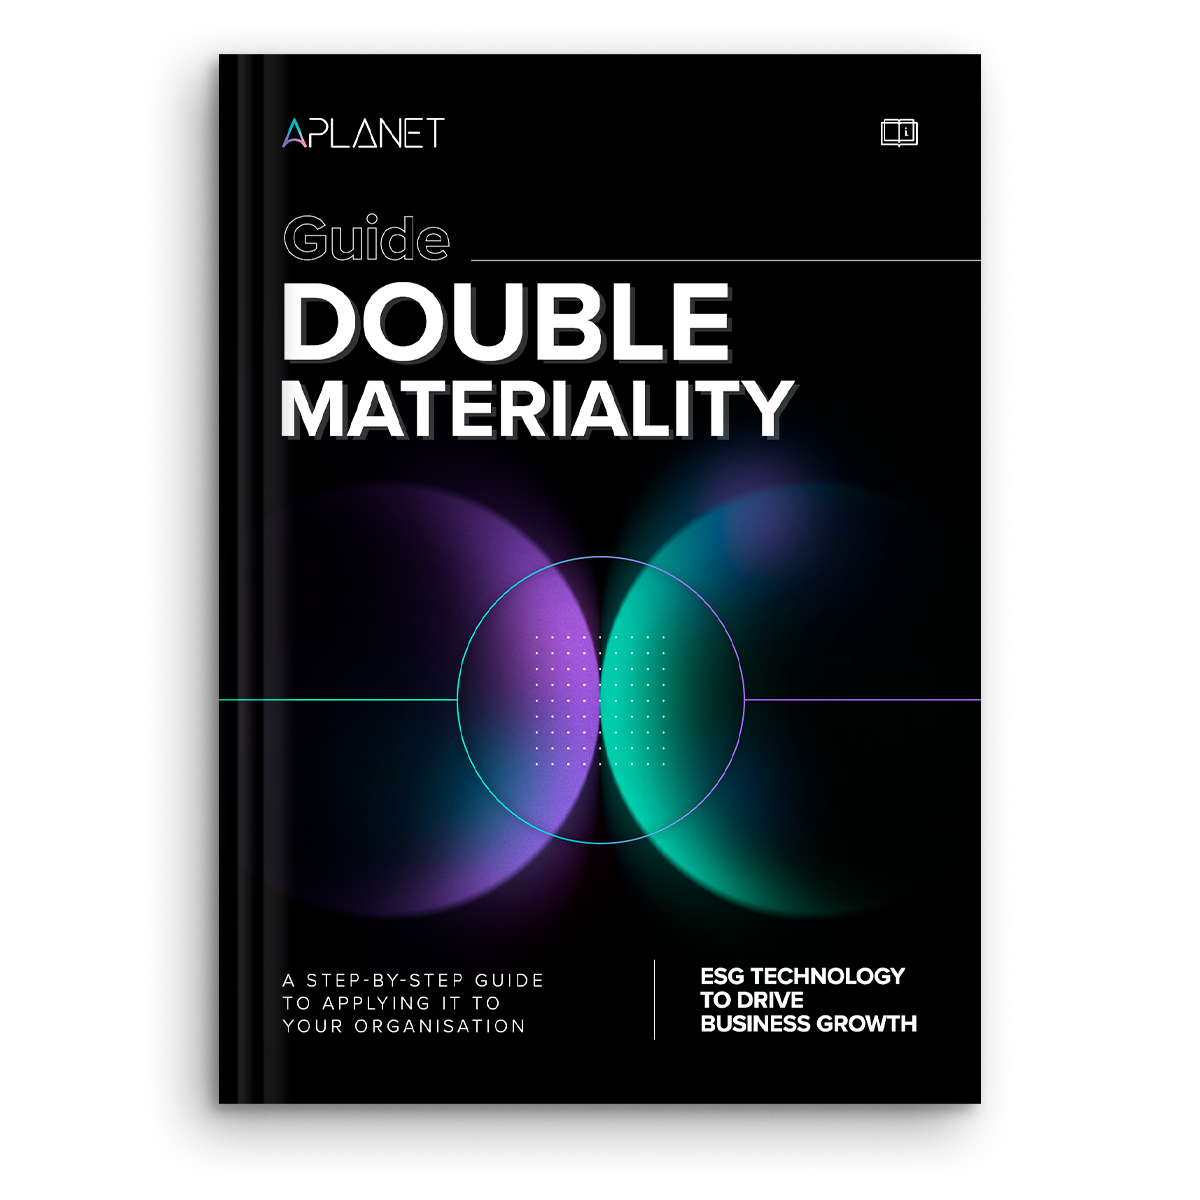 Double Materiality